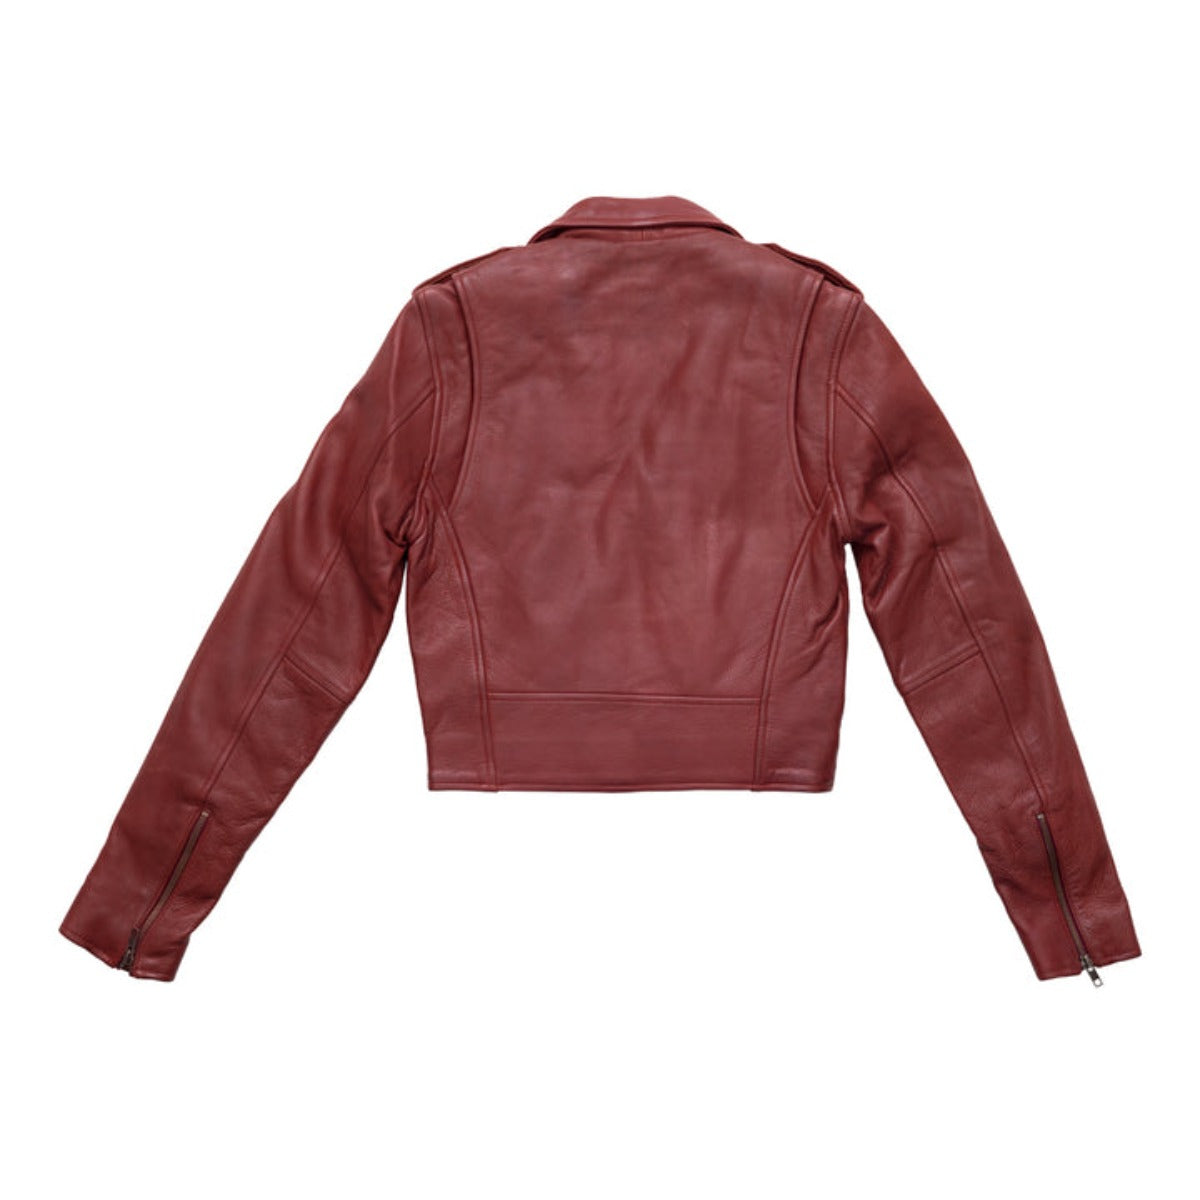 First Manufacturing Katy - Women's Leather Jacket